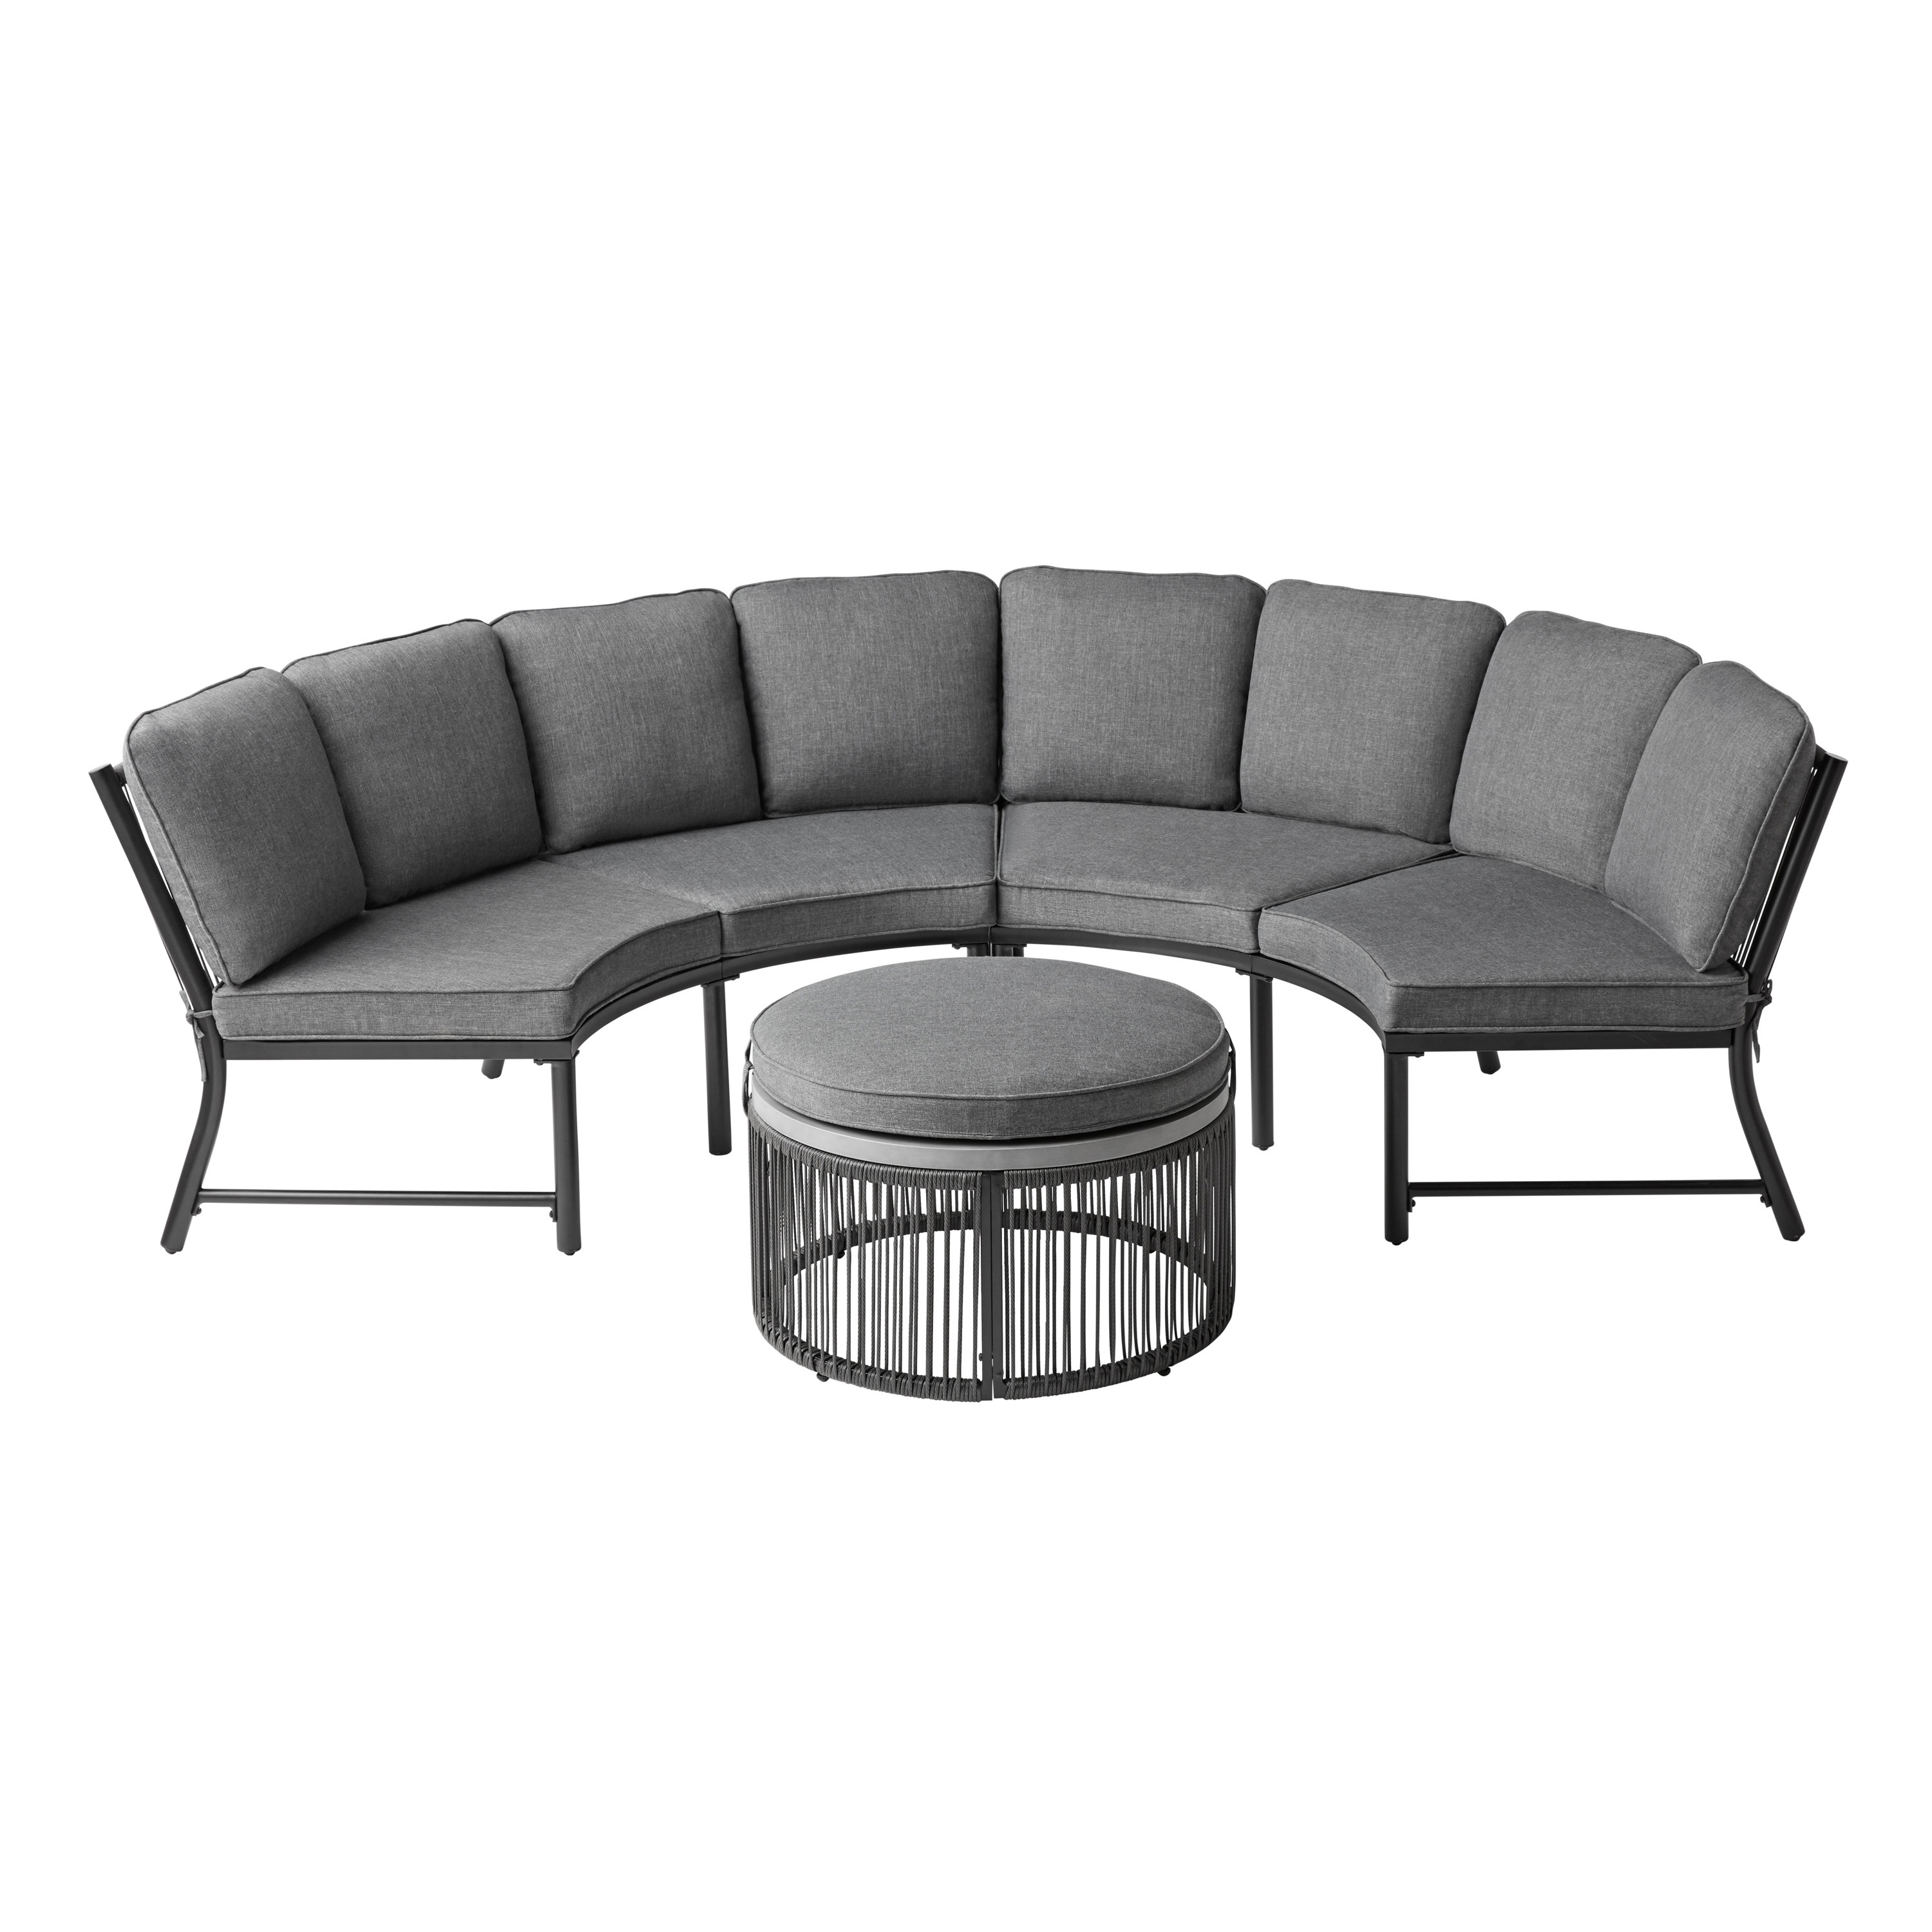 Mainstays Lawson Ridge 3-Piece Steel Curved Outdoor Sectional Set with Cushions, Gray - image 2 of 8